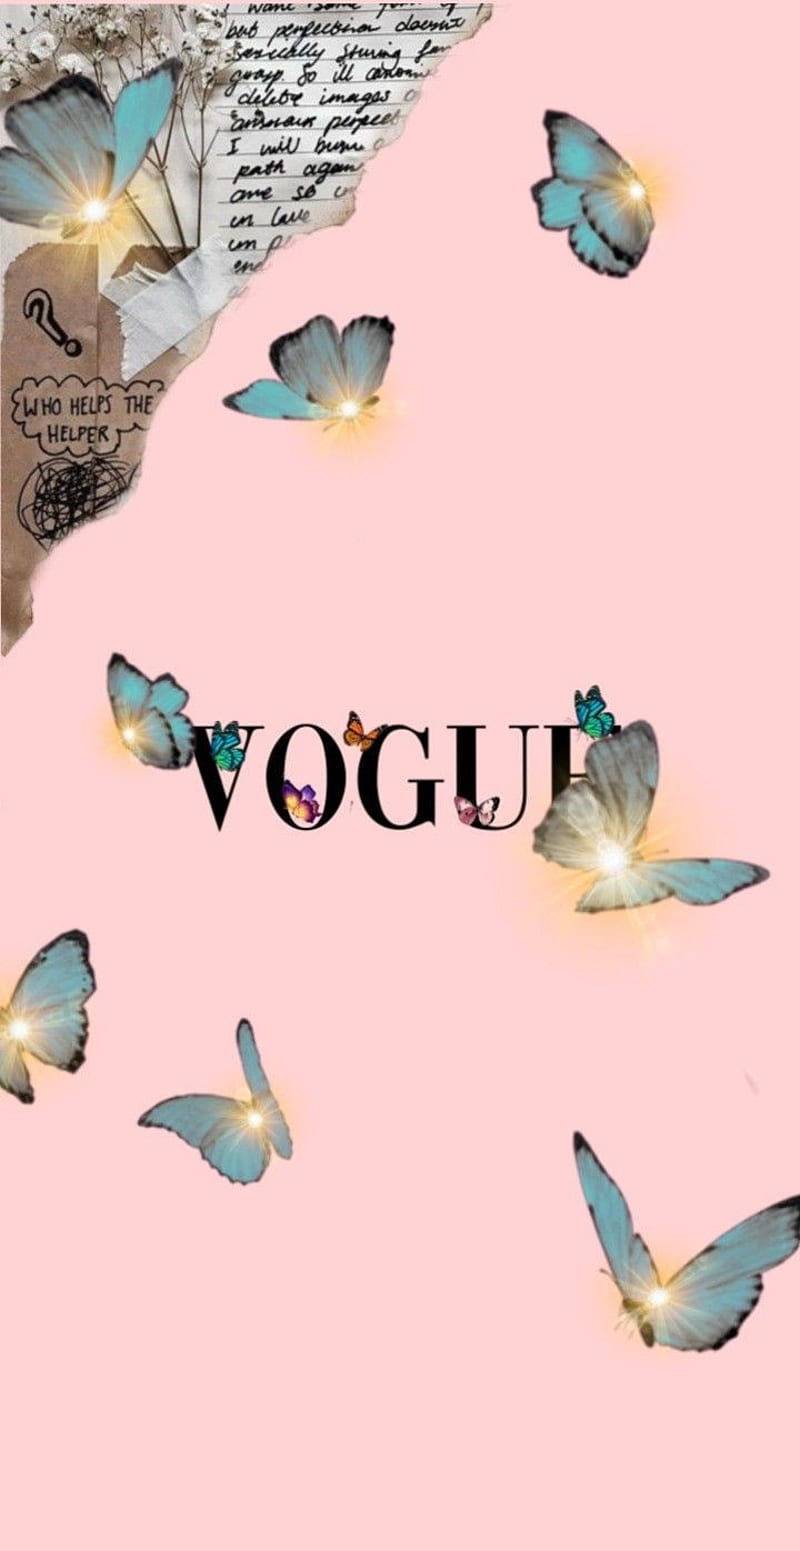 Vogue magazine cover with butterflies - Vogue